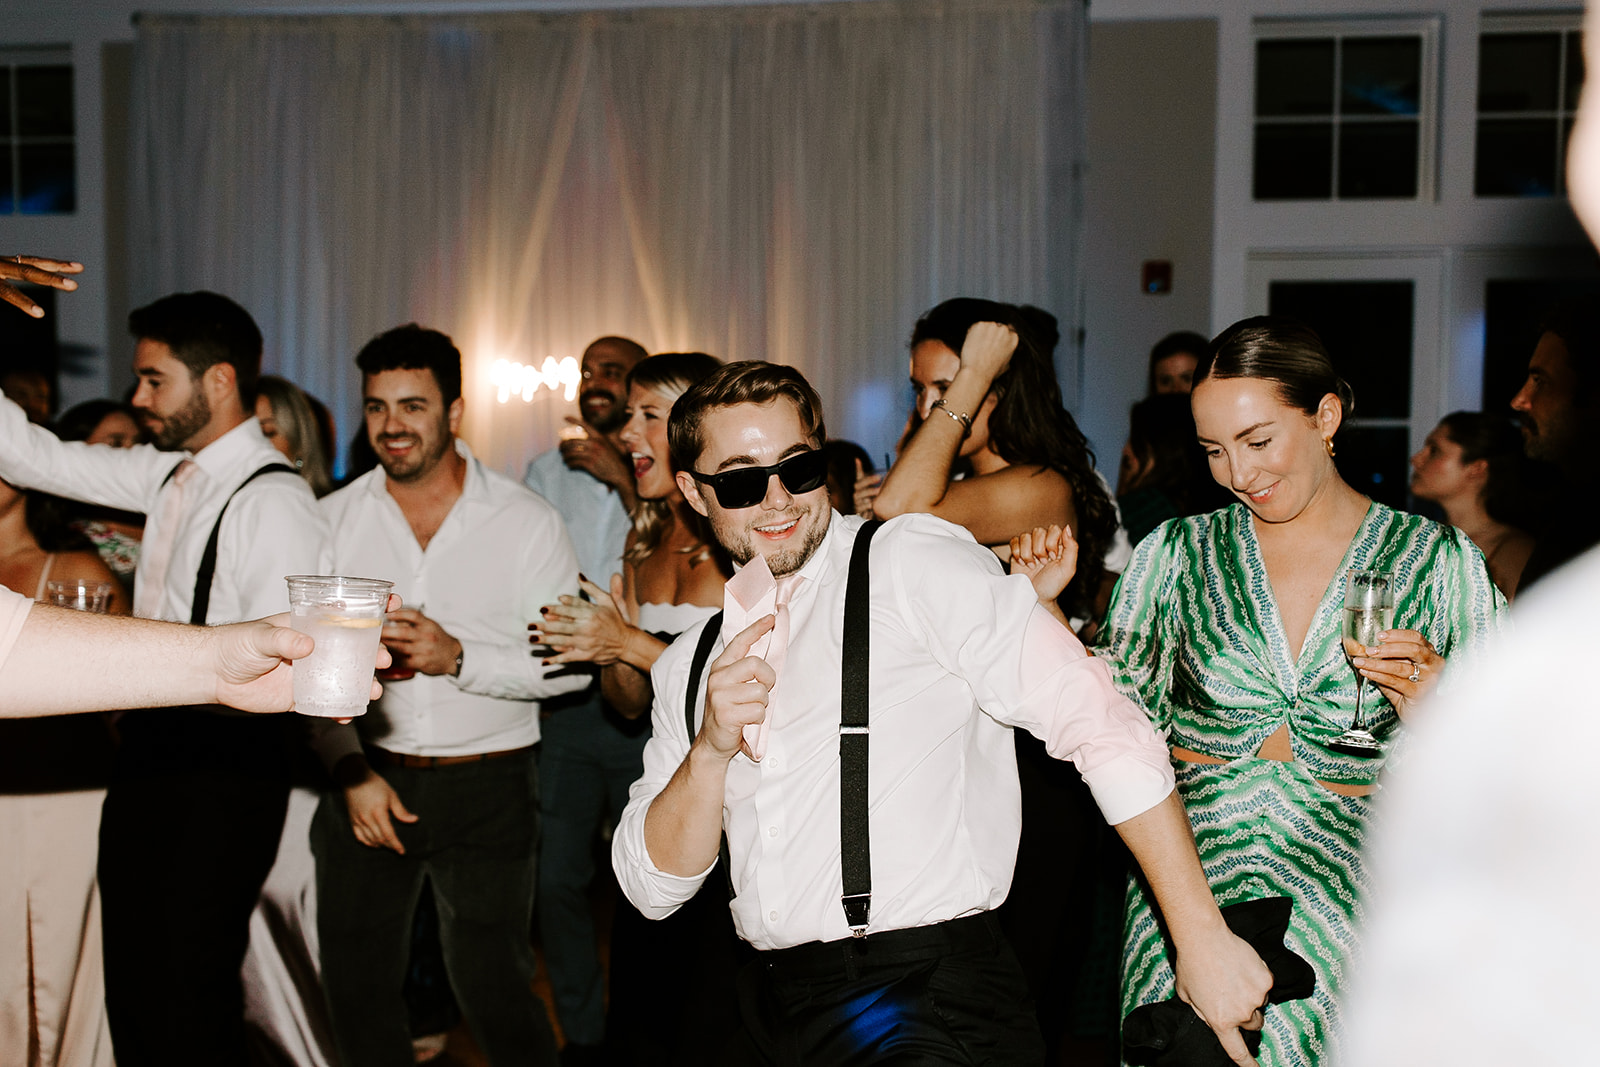 Guests dance and celebrate the perfect New England wedding day